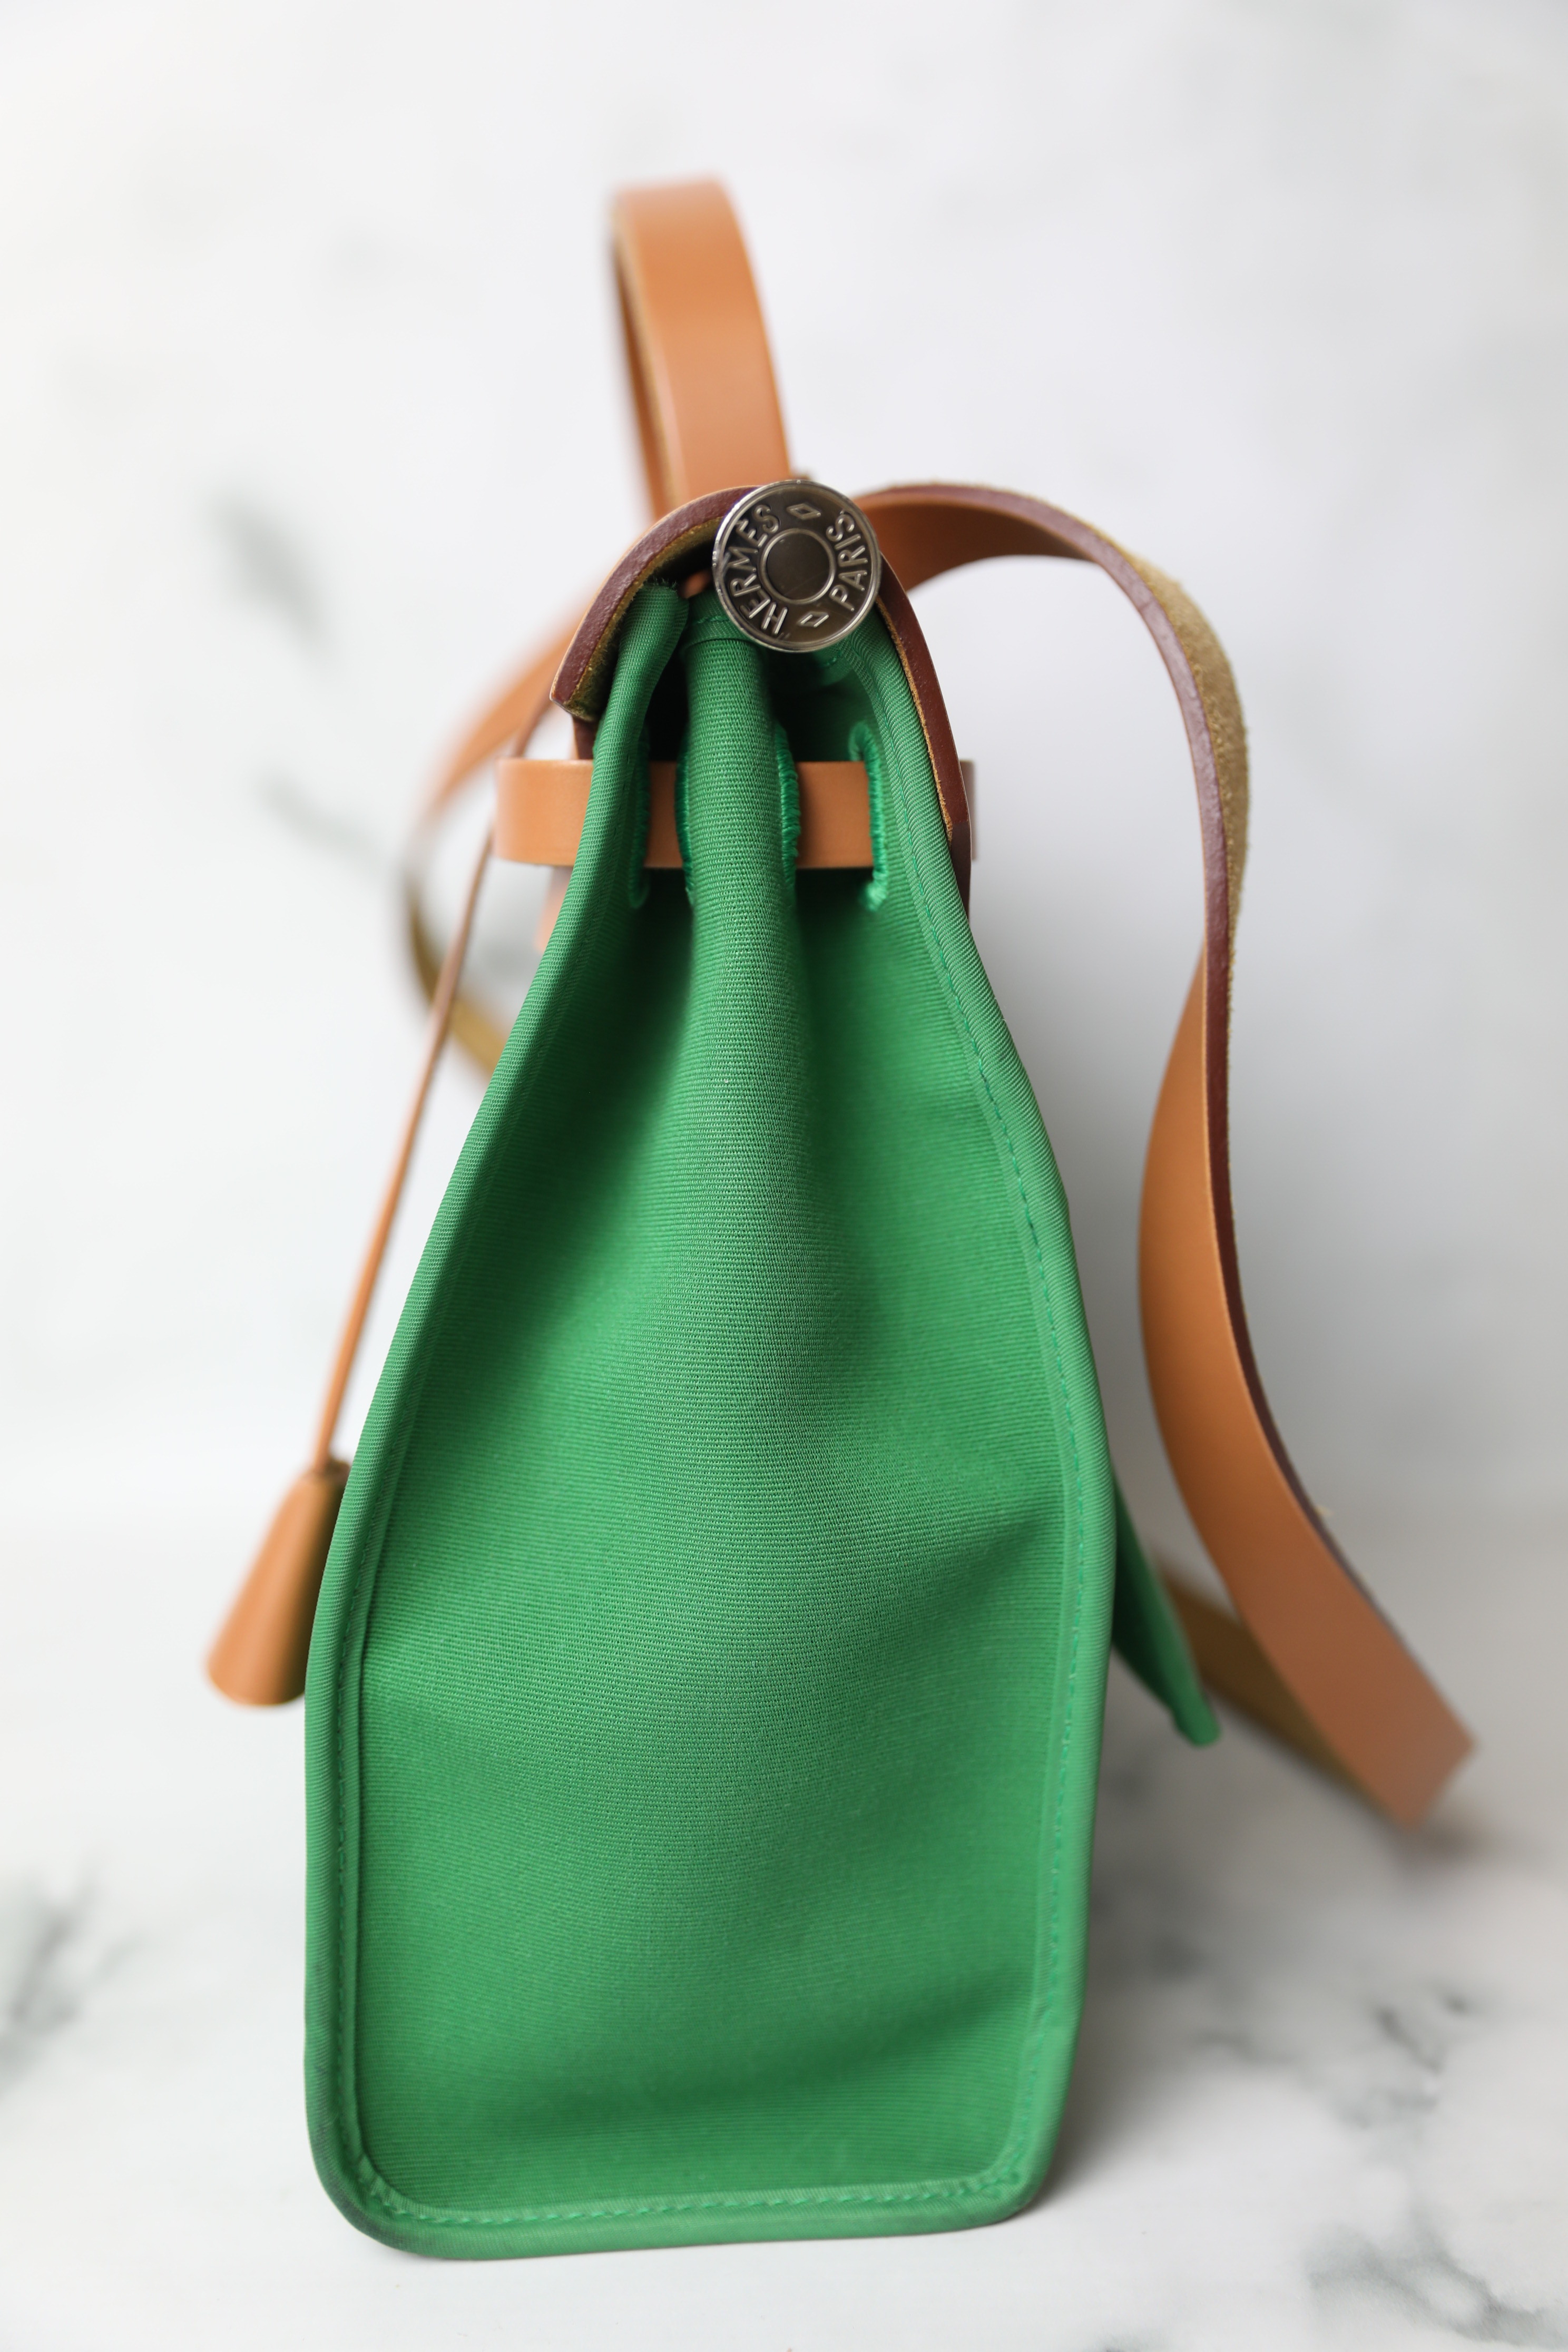 Hermes Herbag 31 Pm, Green with Tan Leather, Preowned No Dustbag WA001 -  Julia Rose Boston